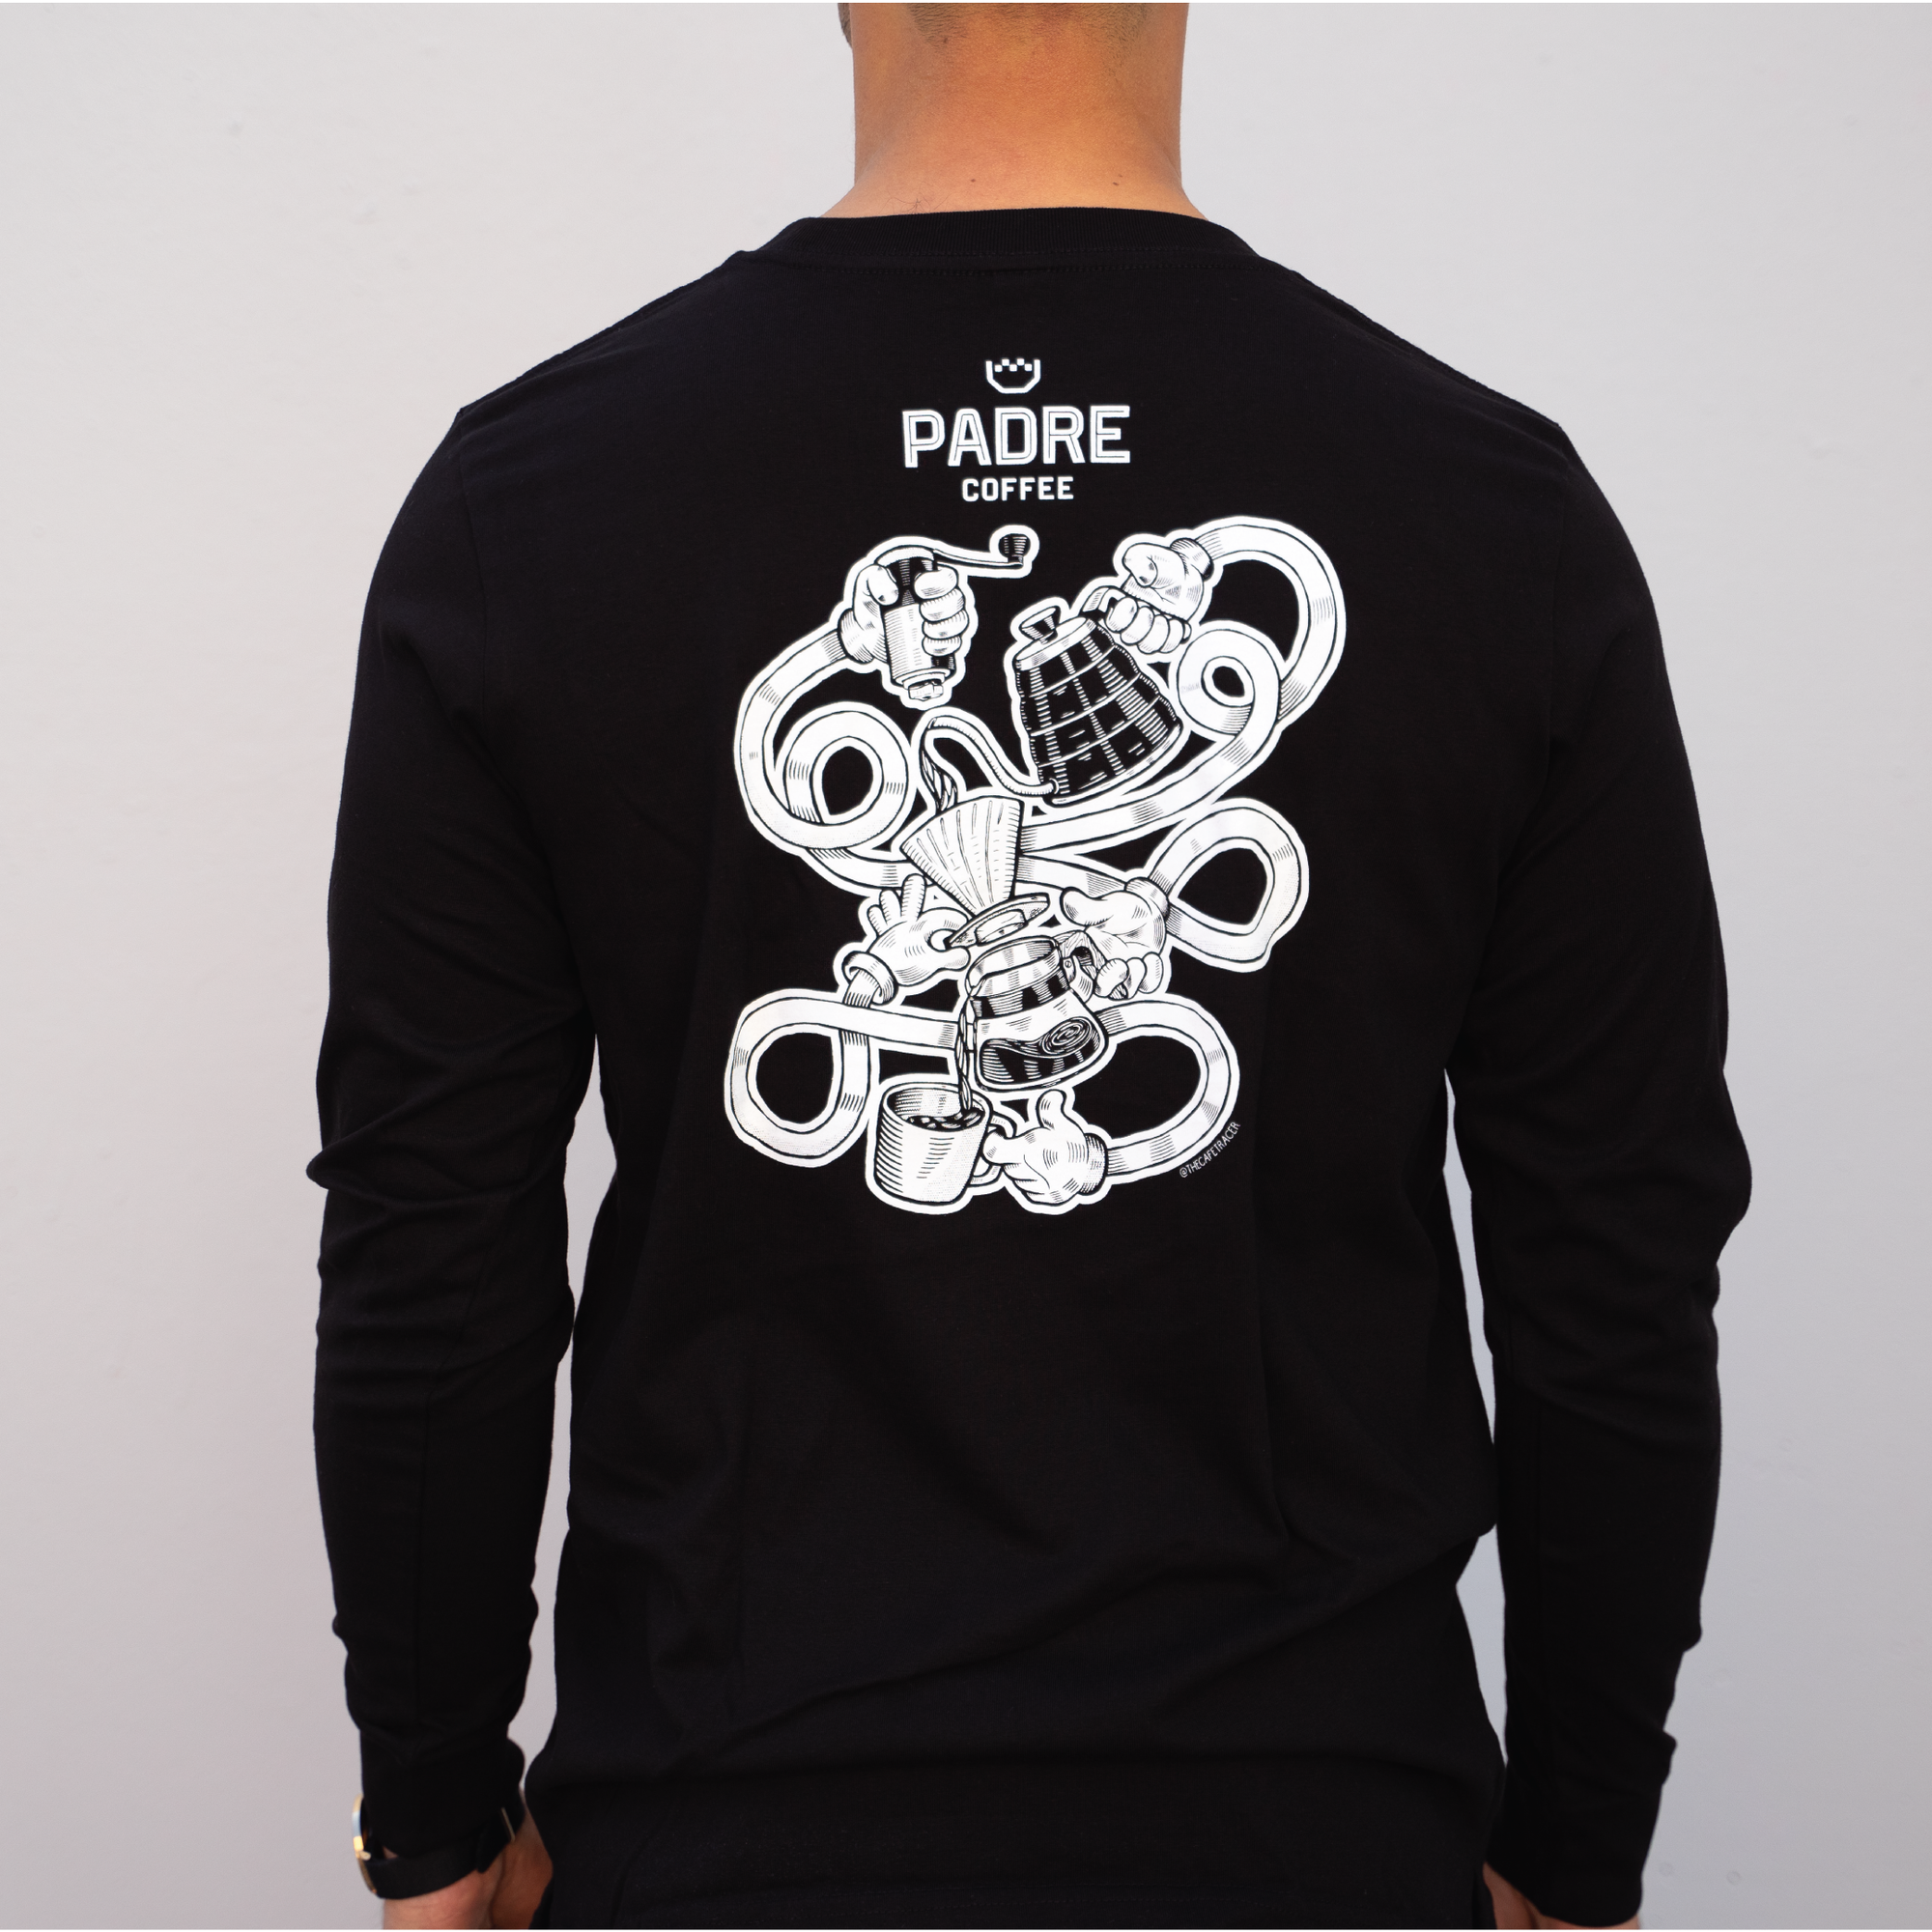 Padre Coffee X The Café Tracer - Long-Sleeved Tee (Black)